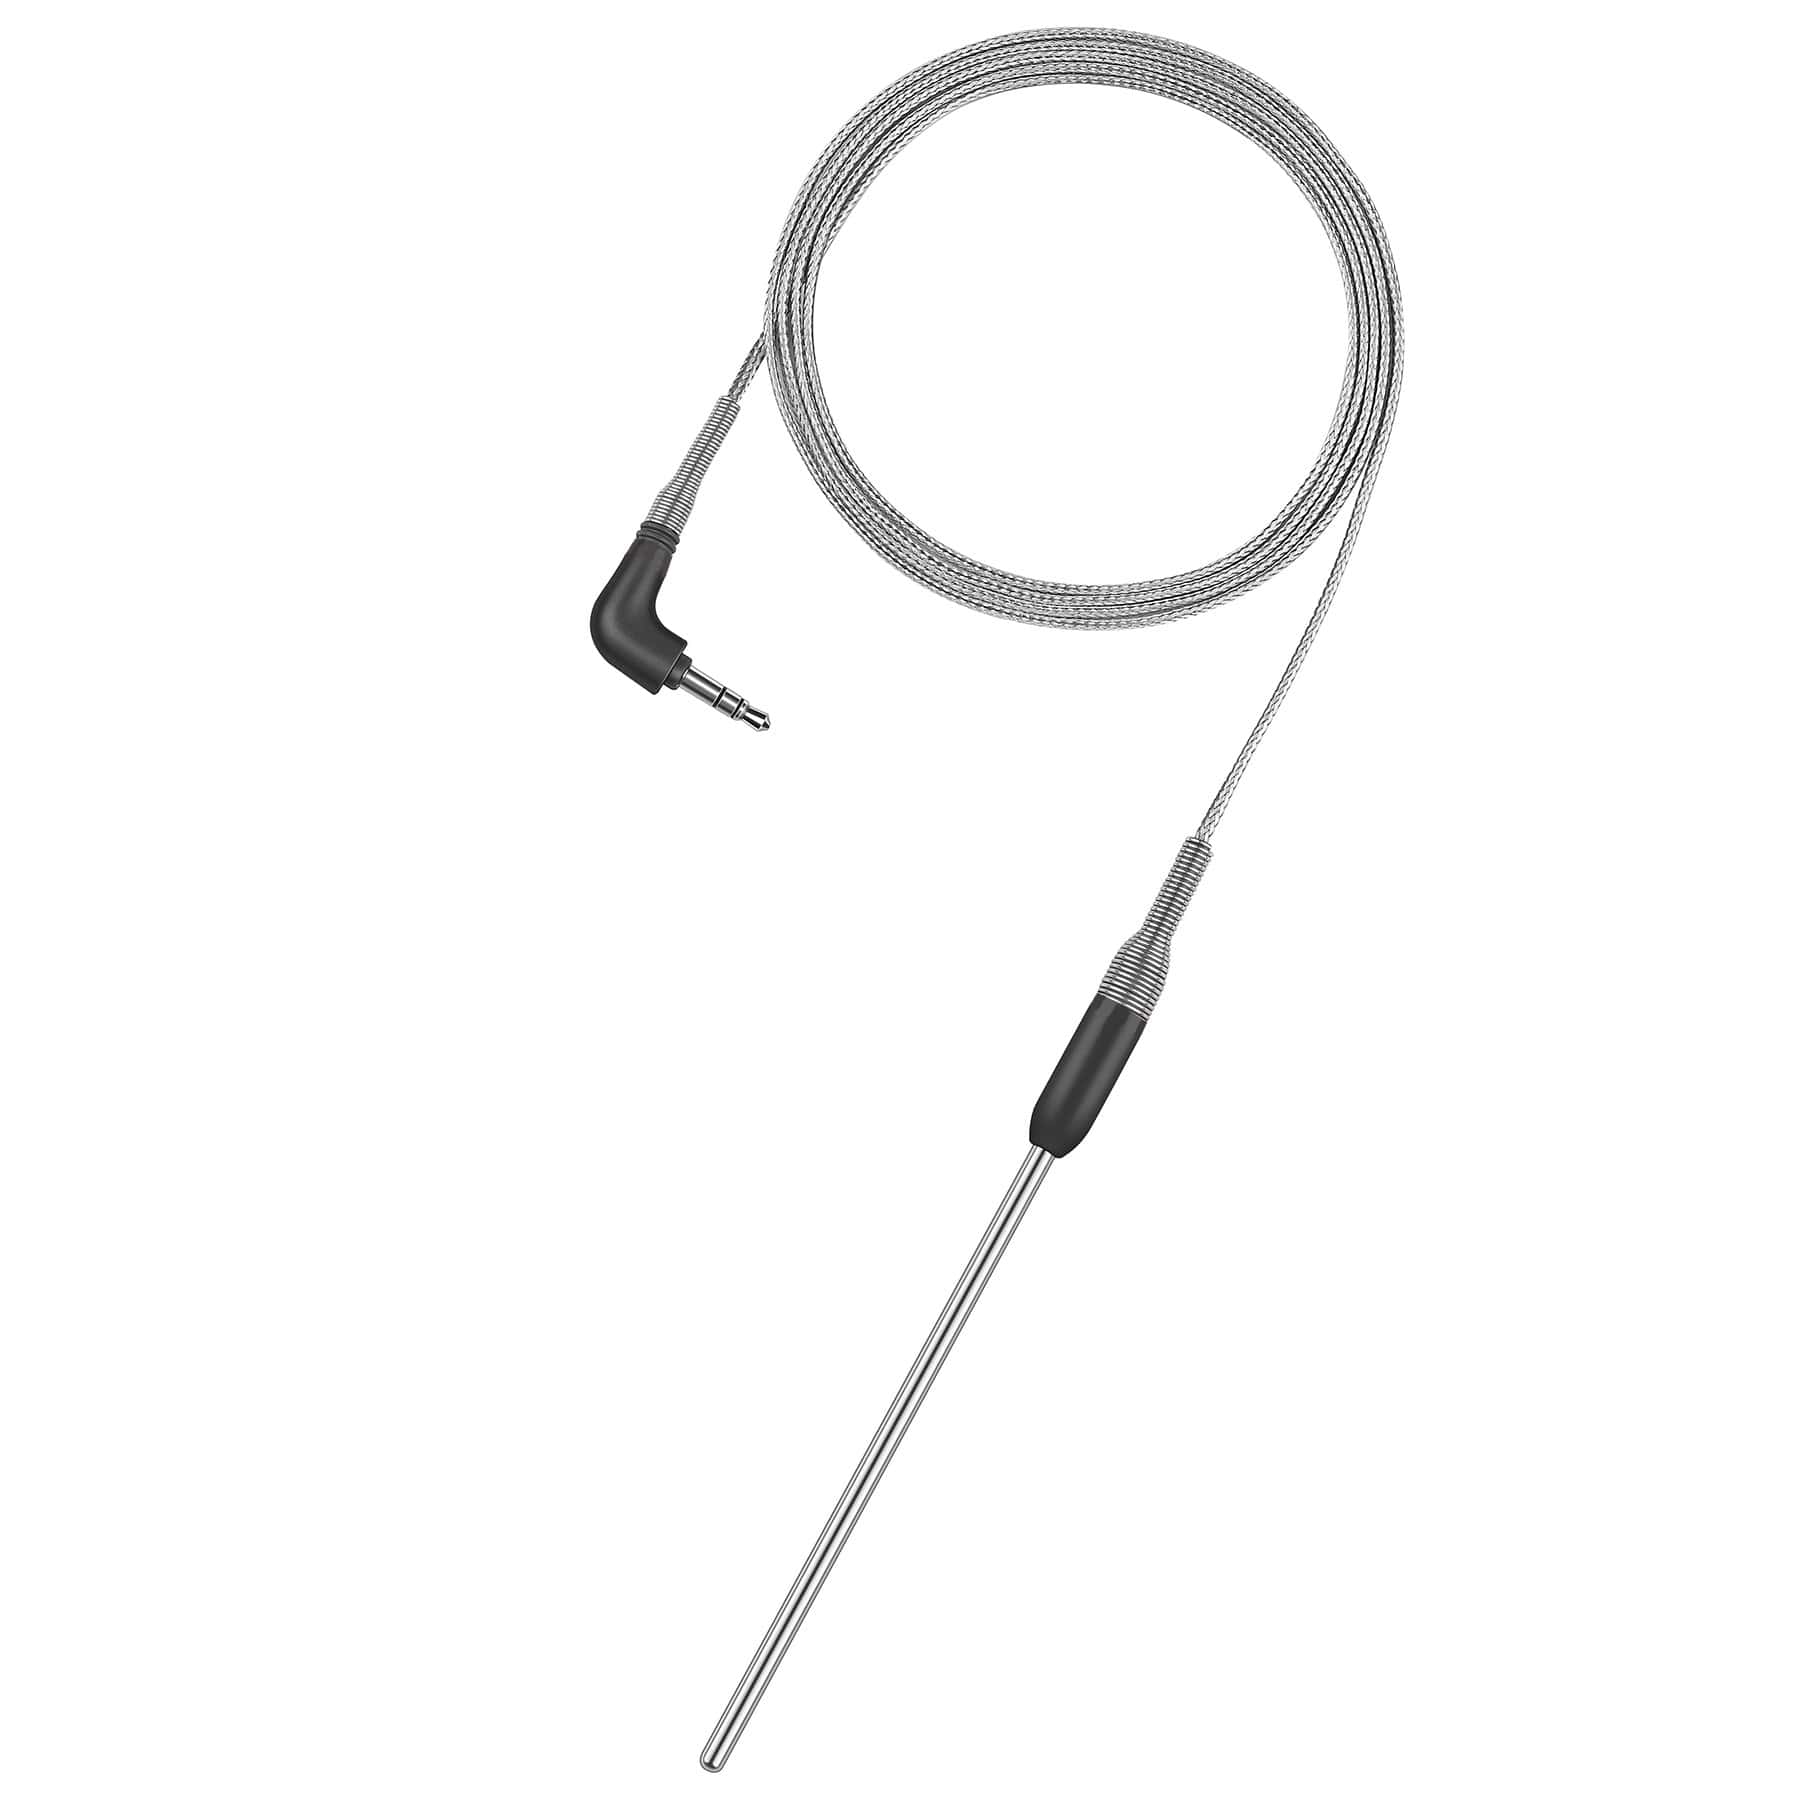 Pro-Series High Temp Air Probe with Grate Clip